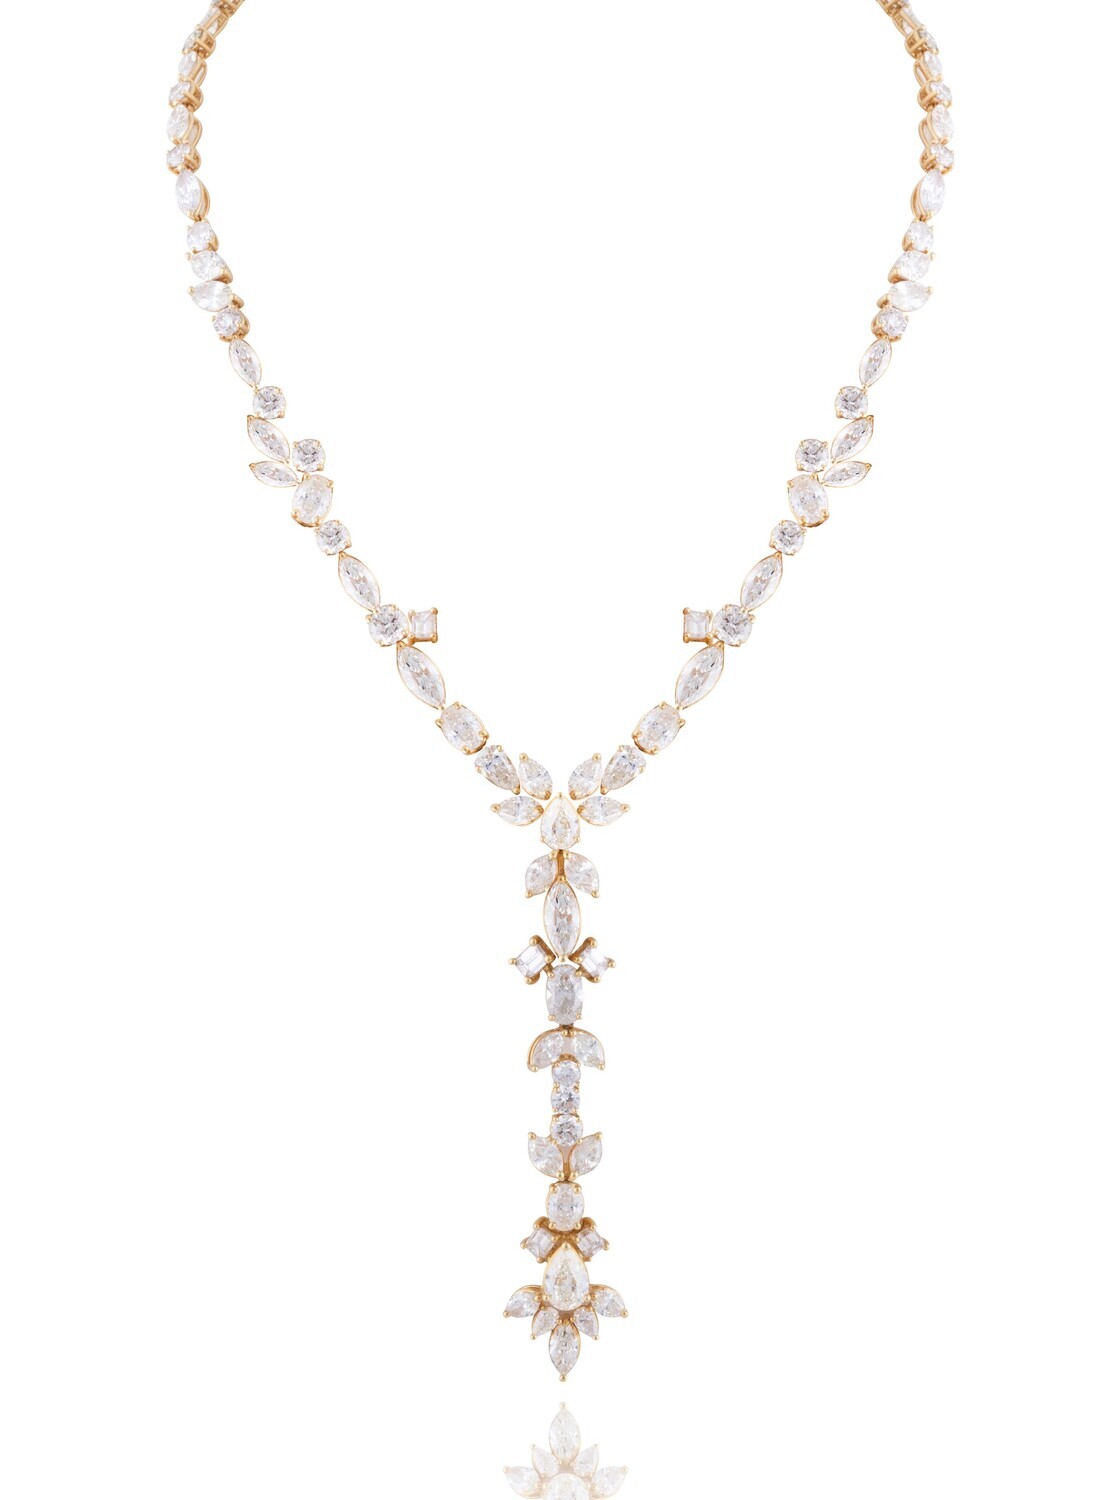 Eternal Diamond Necklace with Marquise, Oval and Pear